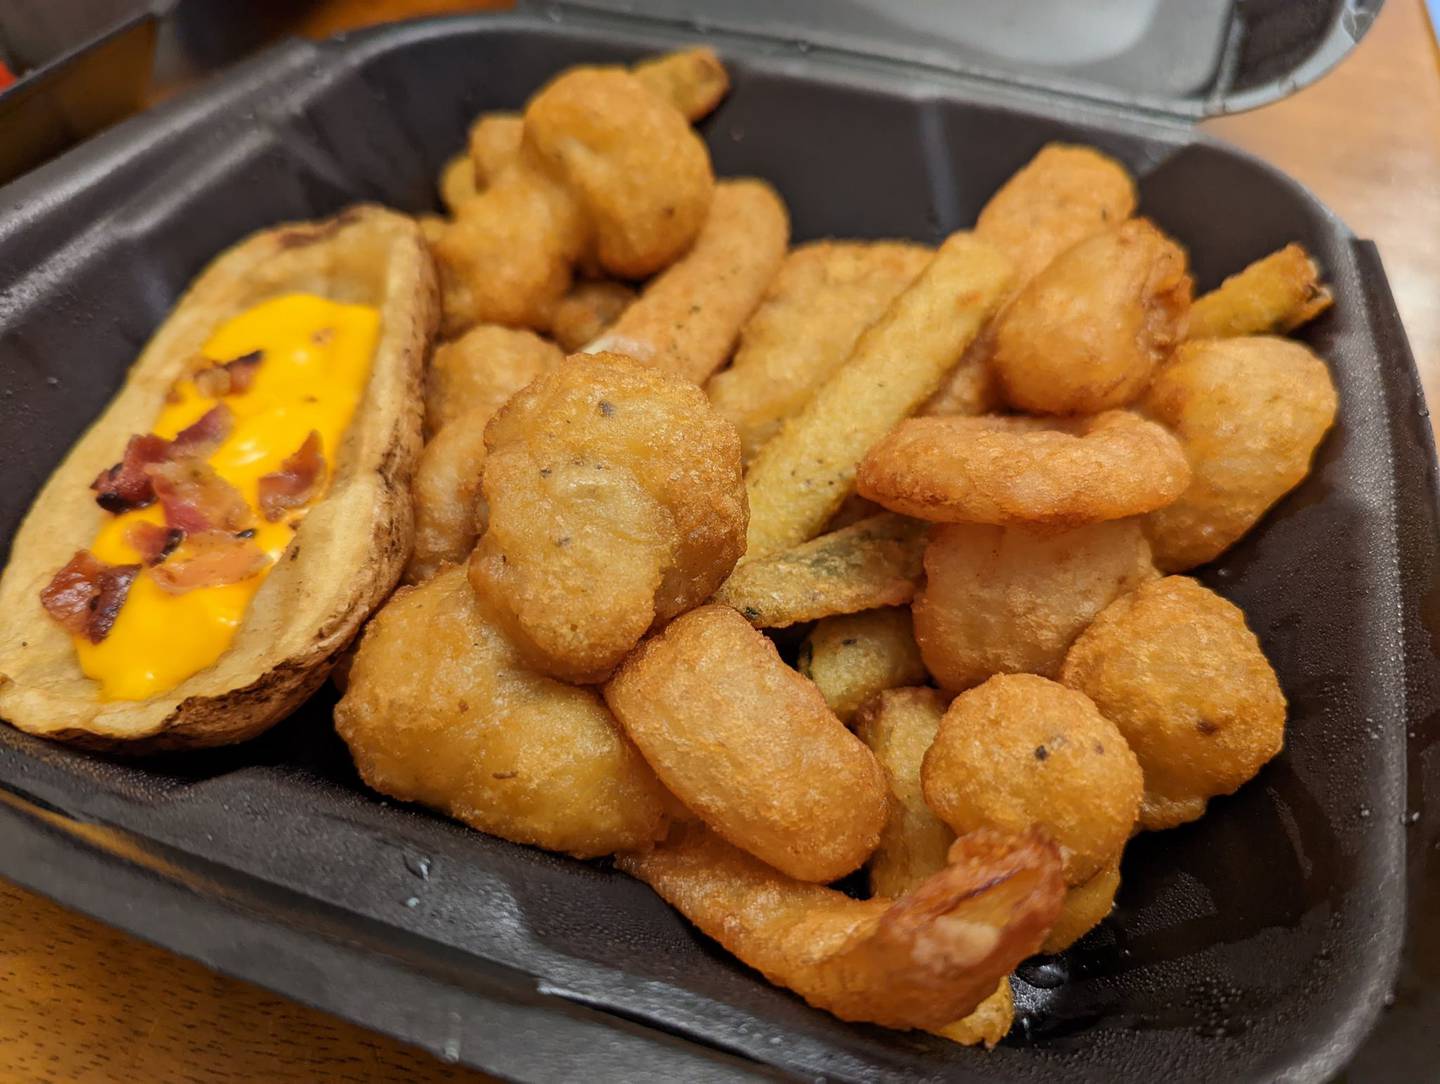 The appetizer combo platter for $10 at Happy Place Cafe in Shorewood includes cheese sticks, onion rings, potato skins, breaded mushrooms, zucchini and cauliflower.